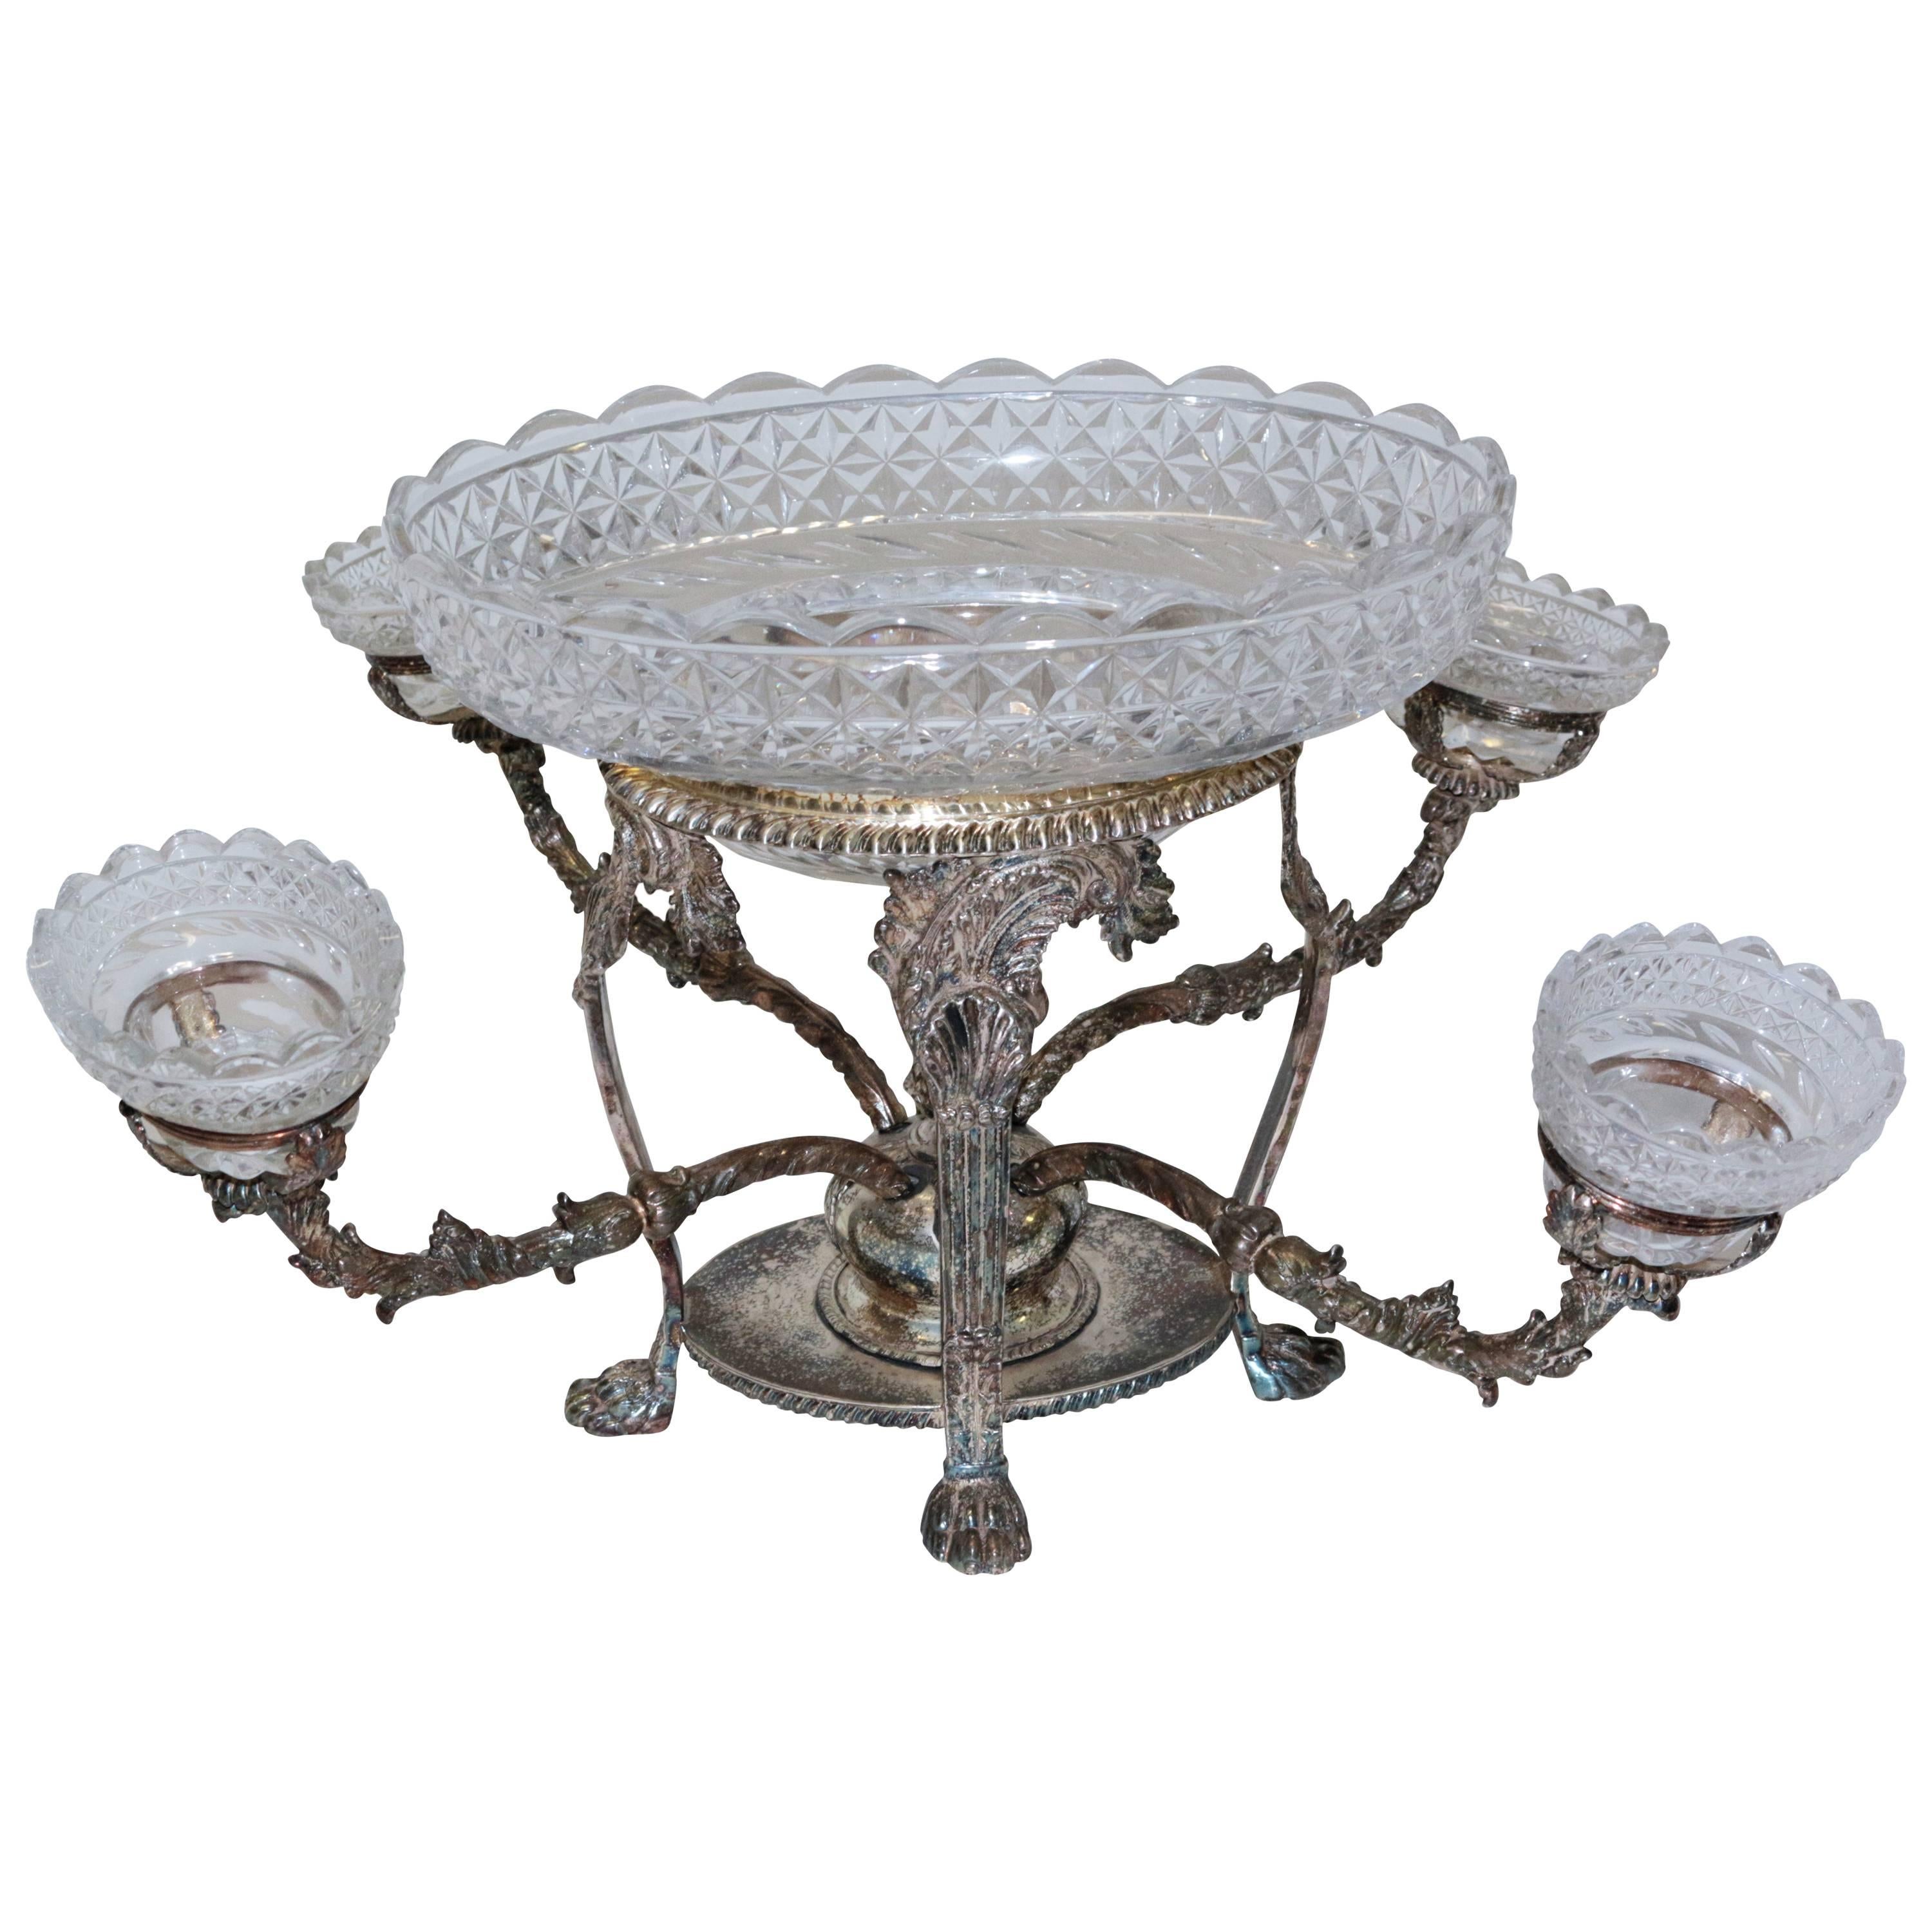 Silver Plated Centrepiece with Four Arms in Bohemian Cut Crystal